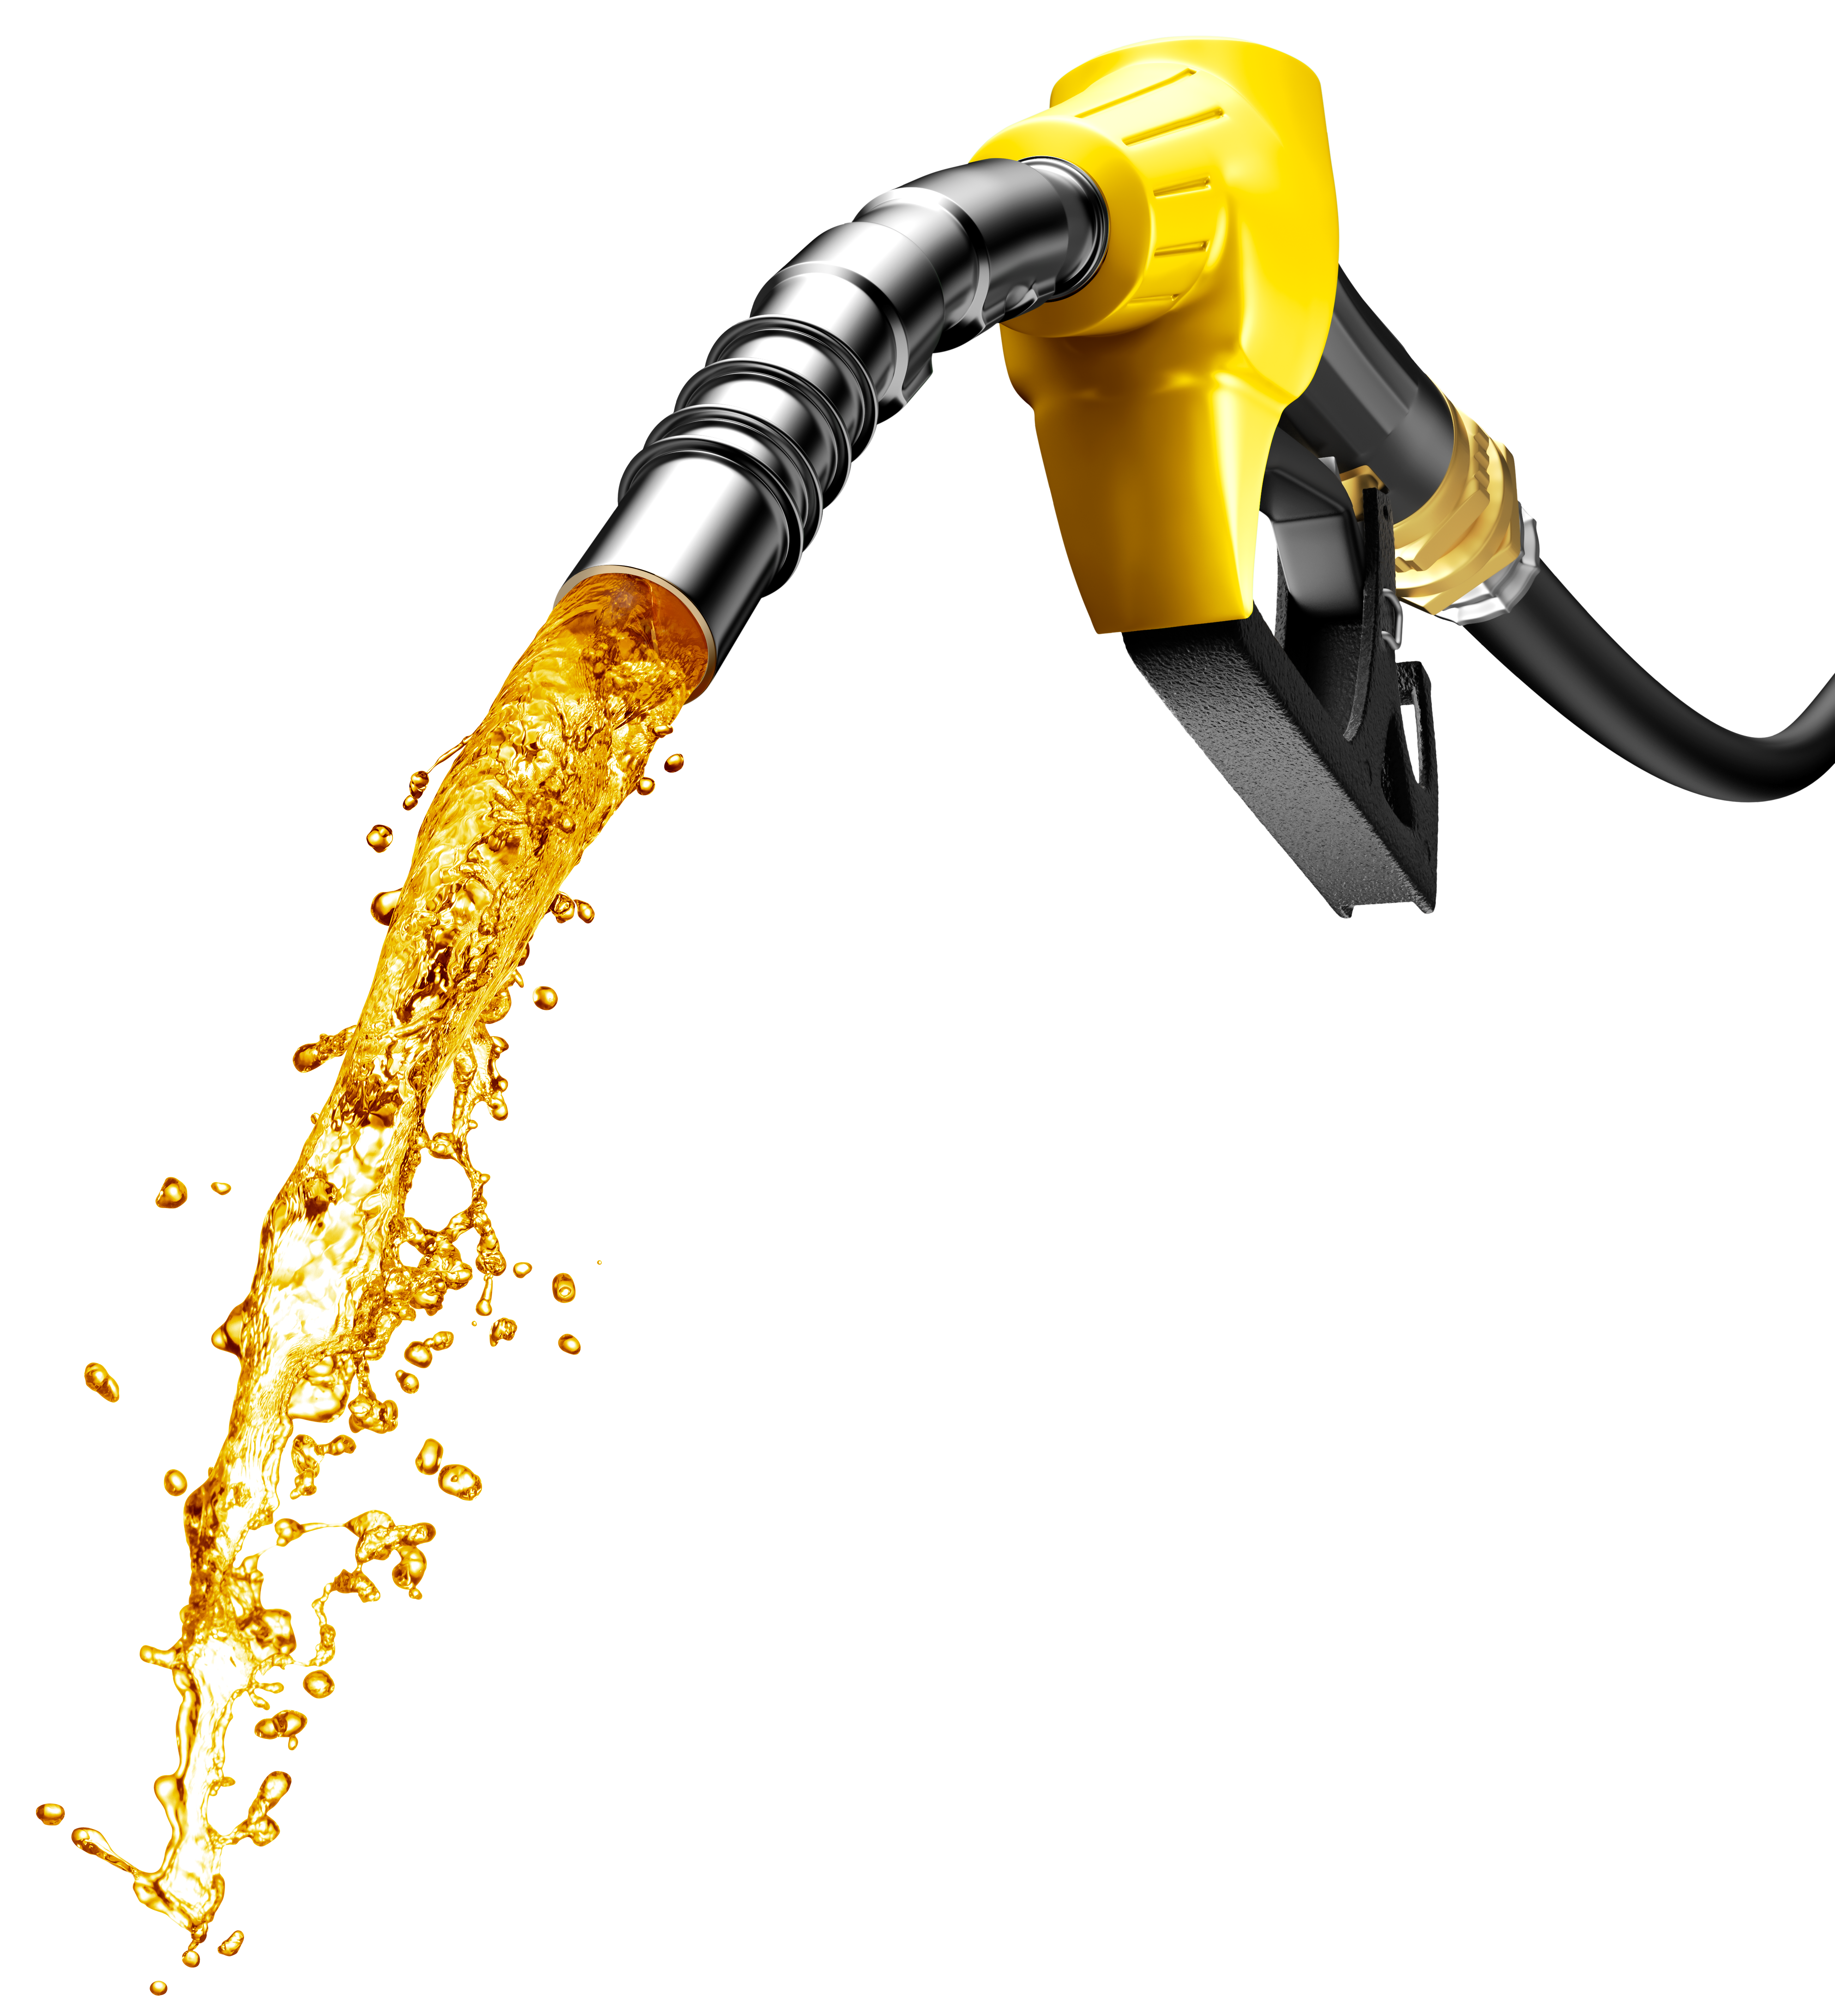 Yellow Gas handle pouring out gasoline